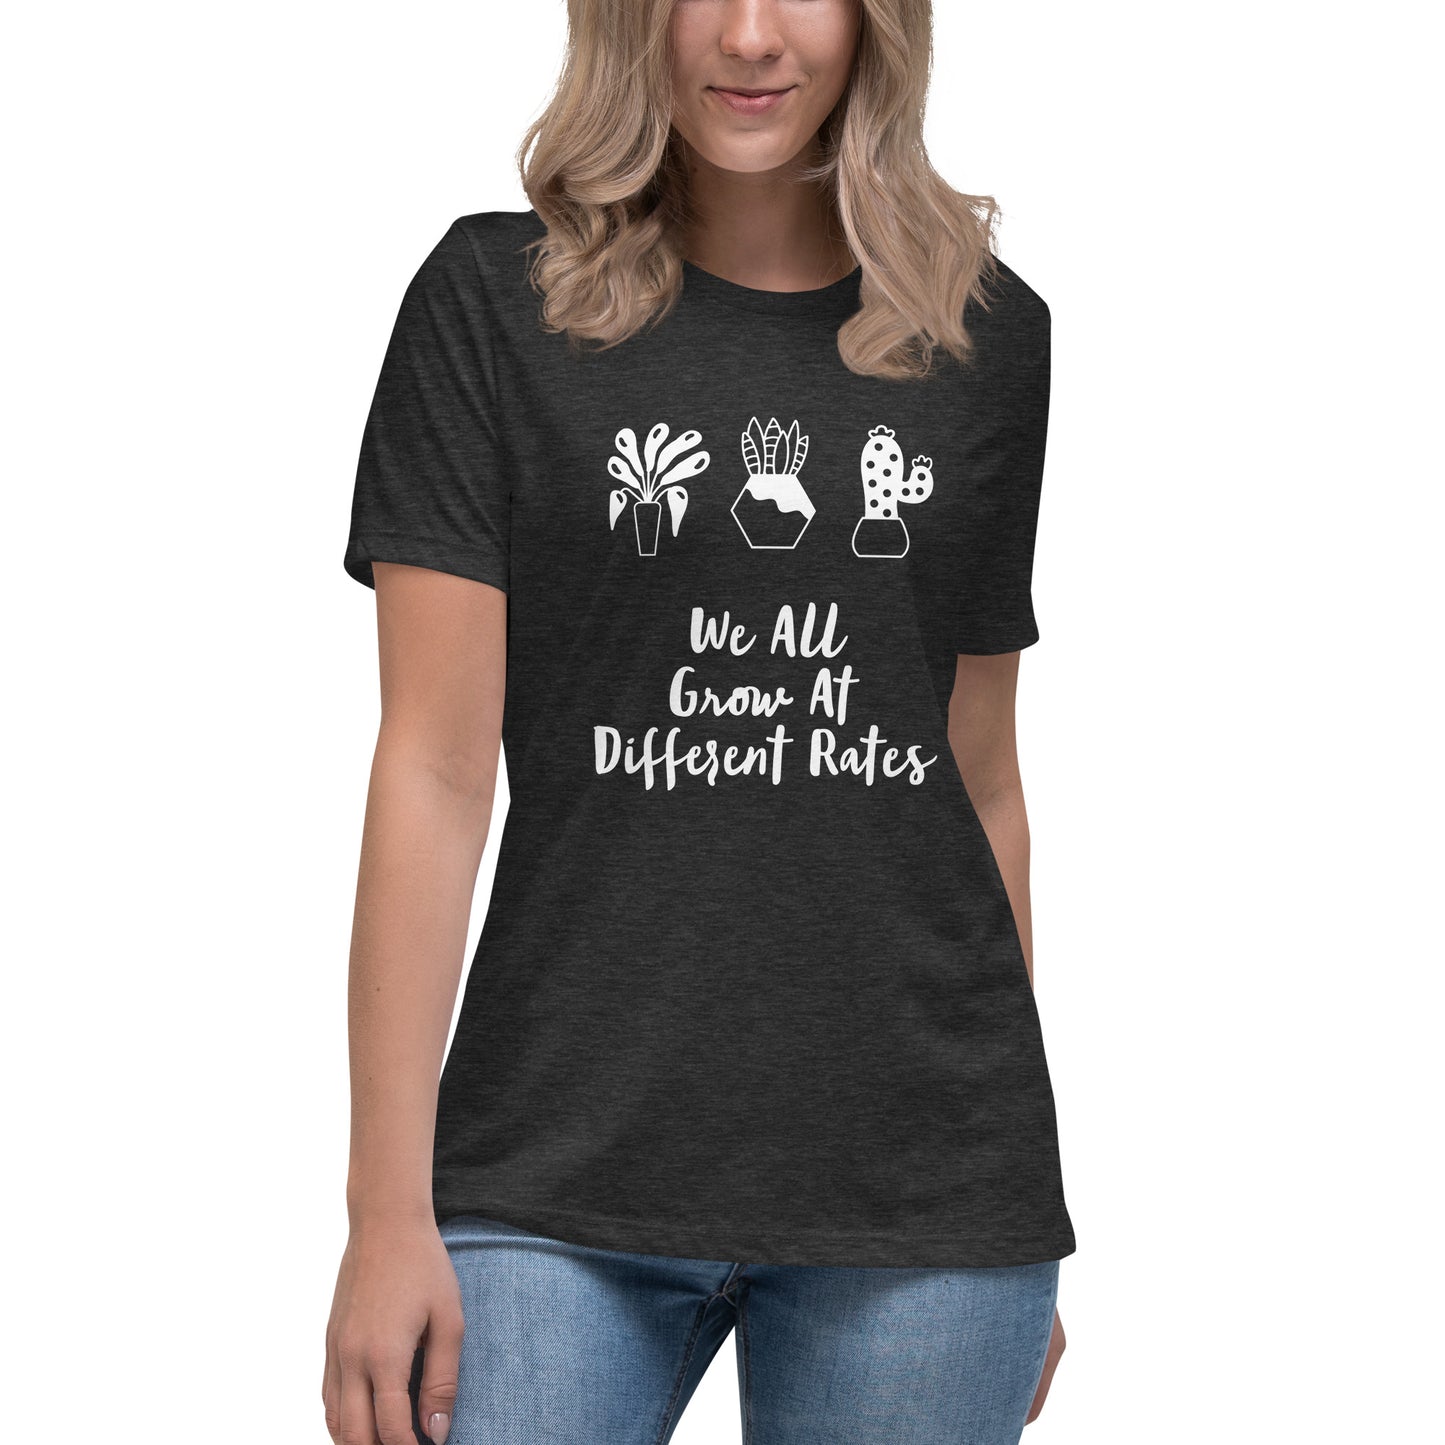 We All Grow At Different Rates Printed T-Shirt